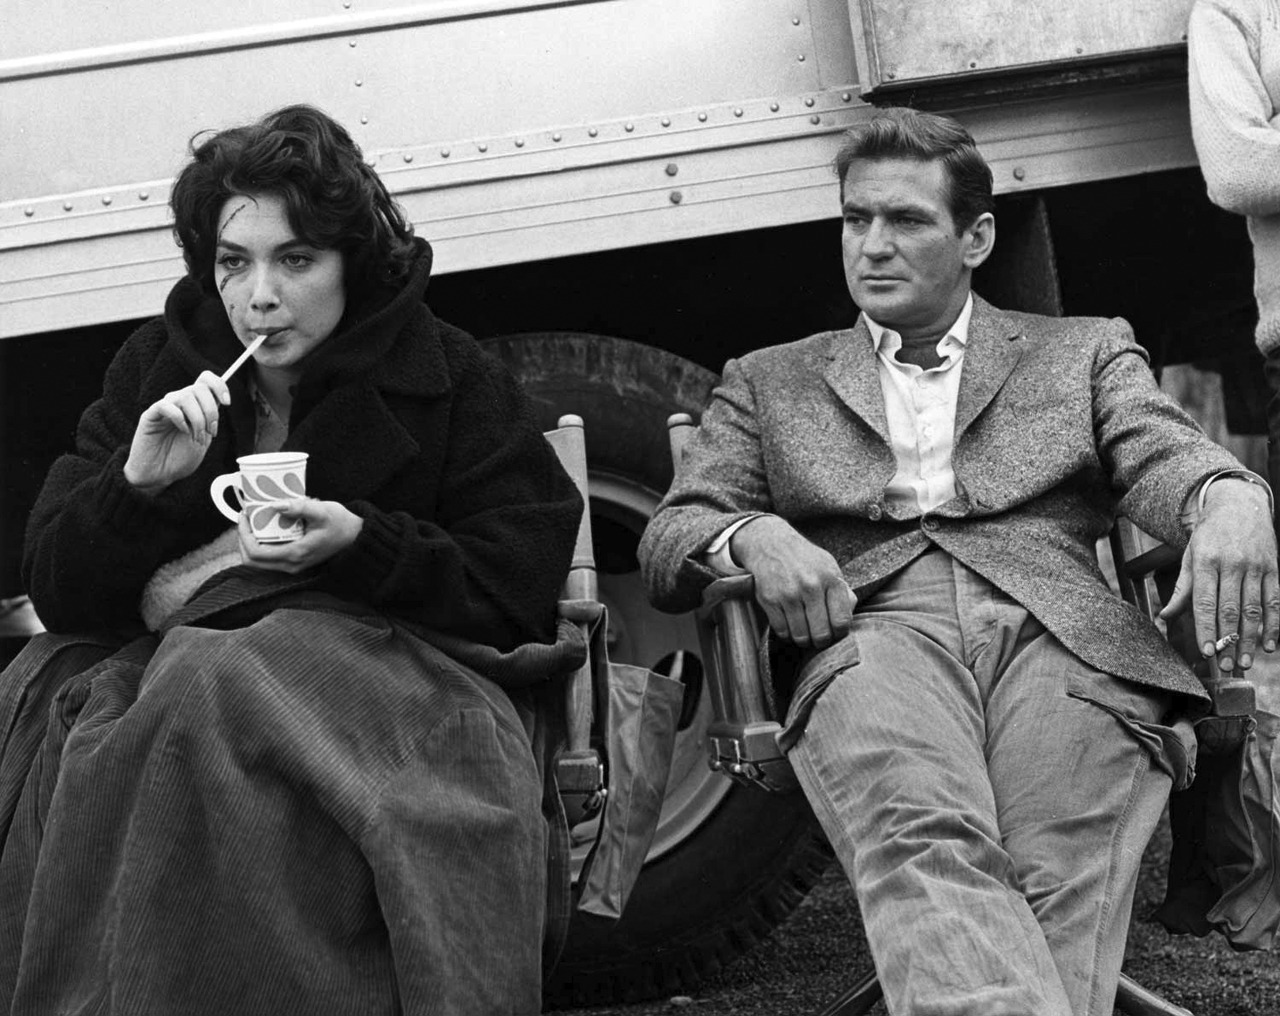 Trim Cargo Pants For Those Rough Days At The Office.Rod Taylor, with Suzanne Pleshette, 1962.